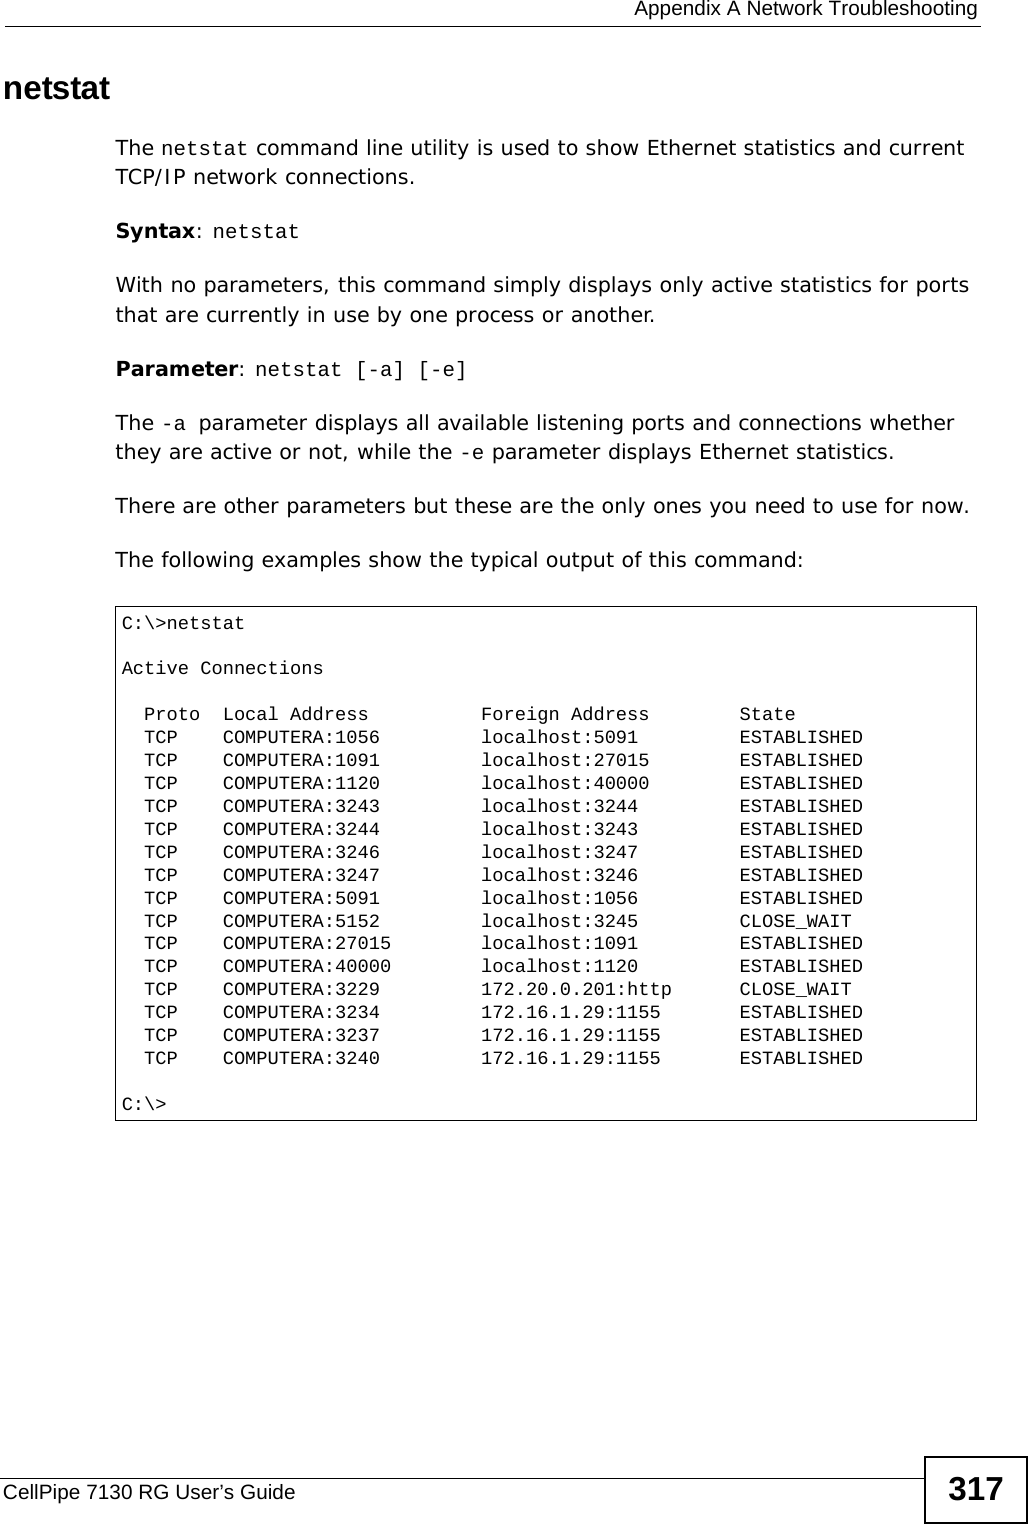  Appendix A Network TroubleshootingCellPipe 7130 RG User’s Guide 317netstatThe netstat command line utility is used to show Ethernet statistics and current TCP/IP network connections.Syntax: netstatWith no parameters, this command simply displays only active statistics for ports that are currently in use by one process or another.Parameter: netstat [-a] [-e]The -a parameter displays all available listening ports and connections whether they are active or not, while the -e parameter displays Ethernet statistics.There are other parameters but these are the only ones you need to use for now.The following examples show the typical output of this command: C:\&gt;netstatActive Connections  Proto  Local Address          Foreign Address        State  TCP    COMPUTERA:1056         localhost:5091         ESTABLISHED  TCP    COMPUTERA:1091         localhost:27015        ESTABLISHED  TCP    COMPUTERA:1120         localhost:40000        ESTABLISHED  TCP    COMPUTERA:3243         localhost:3244         ESTABLISHED  TCP    COMPUTERA:3244         localhost:3243         ESTABLISHED  TCP    COMPUTERA:3246         localhost:3247         ESTABLISHED  TCP    COMPUTERA:3247         localhost:3246         ESTABLISHED  TCP    COMPUTERA:5091         localhost:1056         ESTABLISHED  TCP    COMPUTERA:5152         localhost:3245         CLOSE_WAIT  TCP    COMPUTERA:27015        localhost:1091         ESTABLISHED  TCP    COMPUTERA:40000        localhost:1120         ESTABLISHED  TCP    COMPUTERA:3229         172.20.0.201:http      CLOSE_WAIT  TCP    COMPUTERA:3234         172.16.1.29:1155       ESTABLISHED  TCP    COMPUTERA:3237         172.16.1.29:1155       ESTABLISHED  TCP    COMPUTERA:3240         172.16.1.29:1155       ESTABLISHEDC:\&gt;